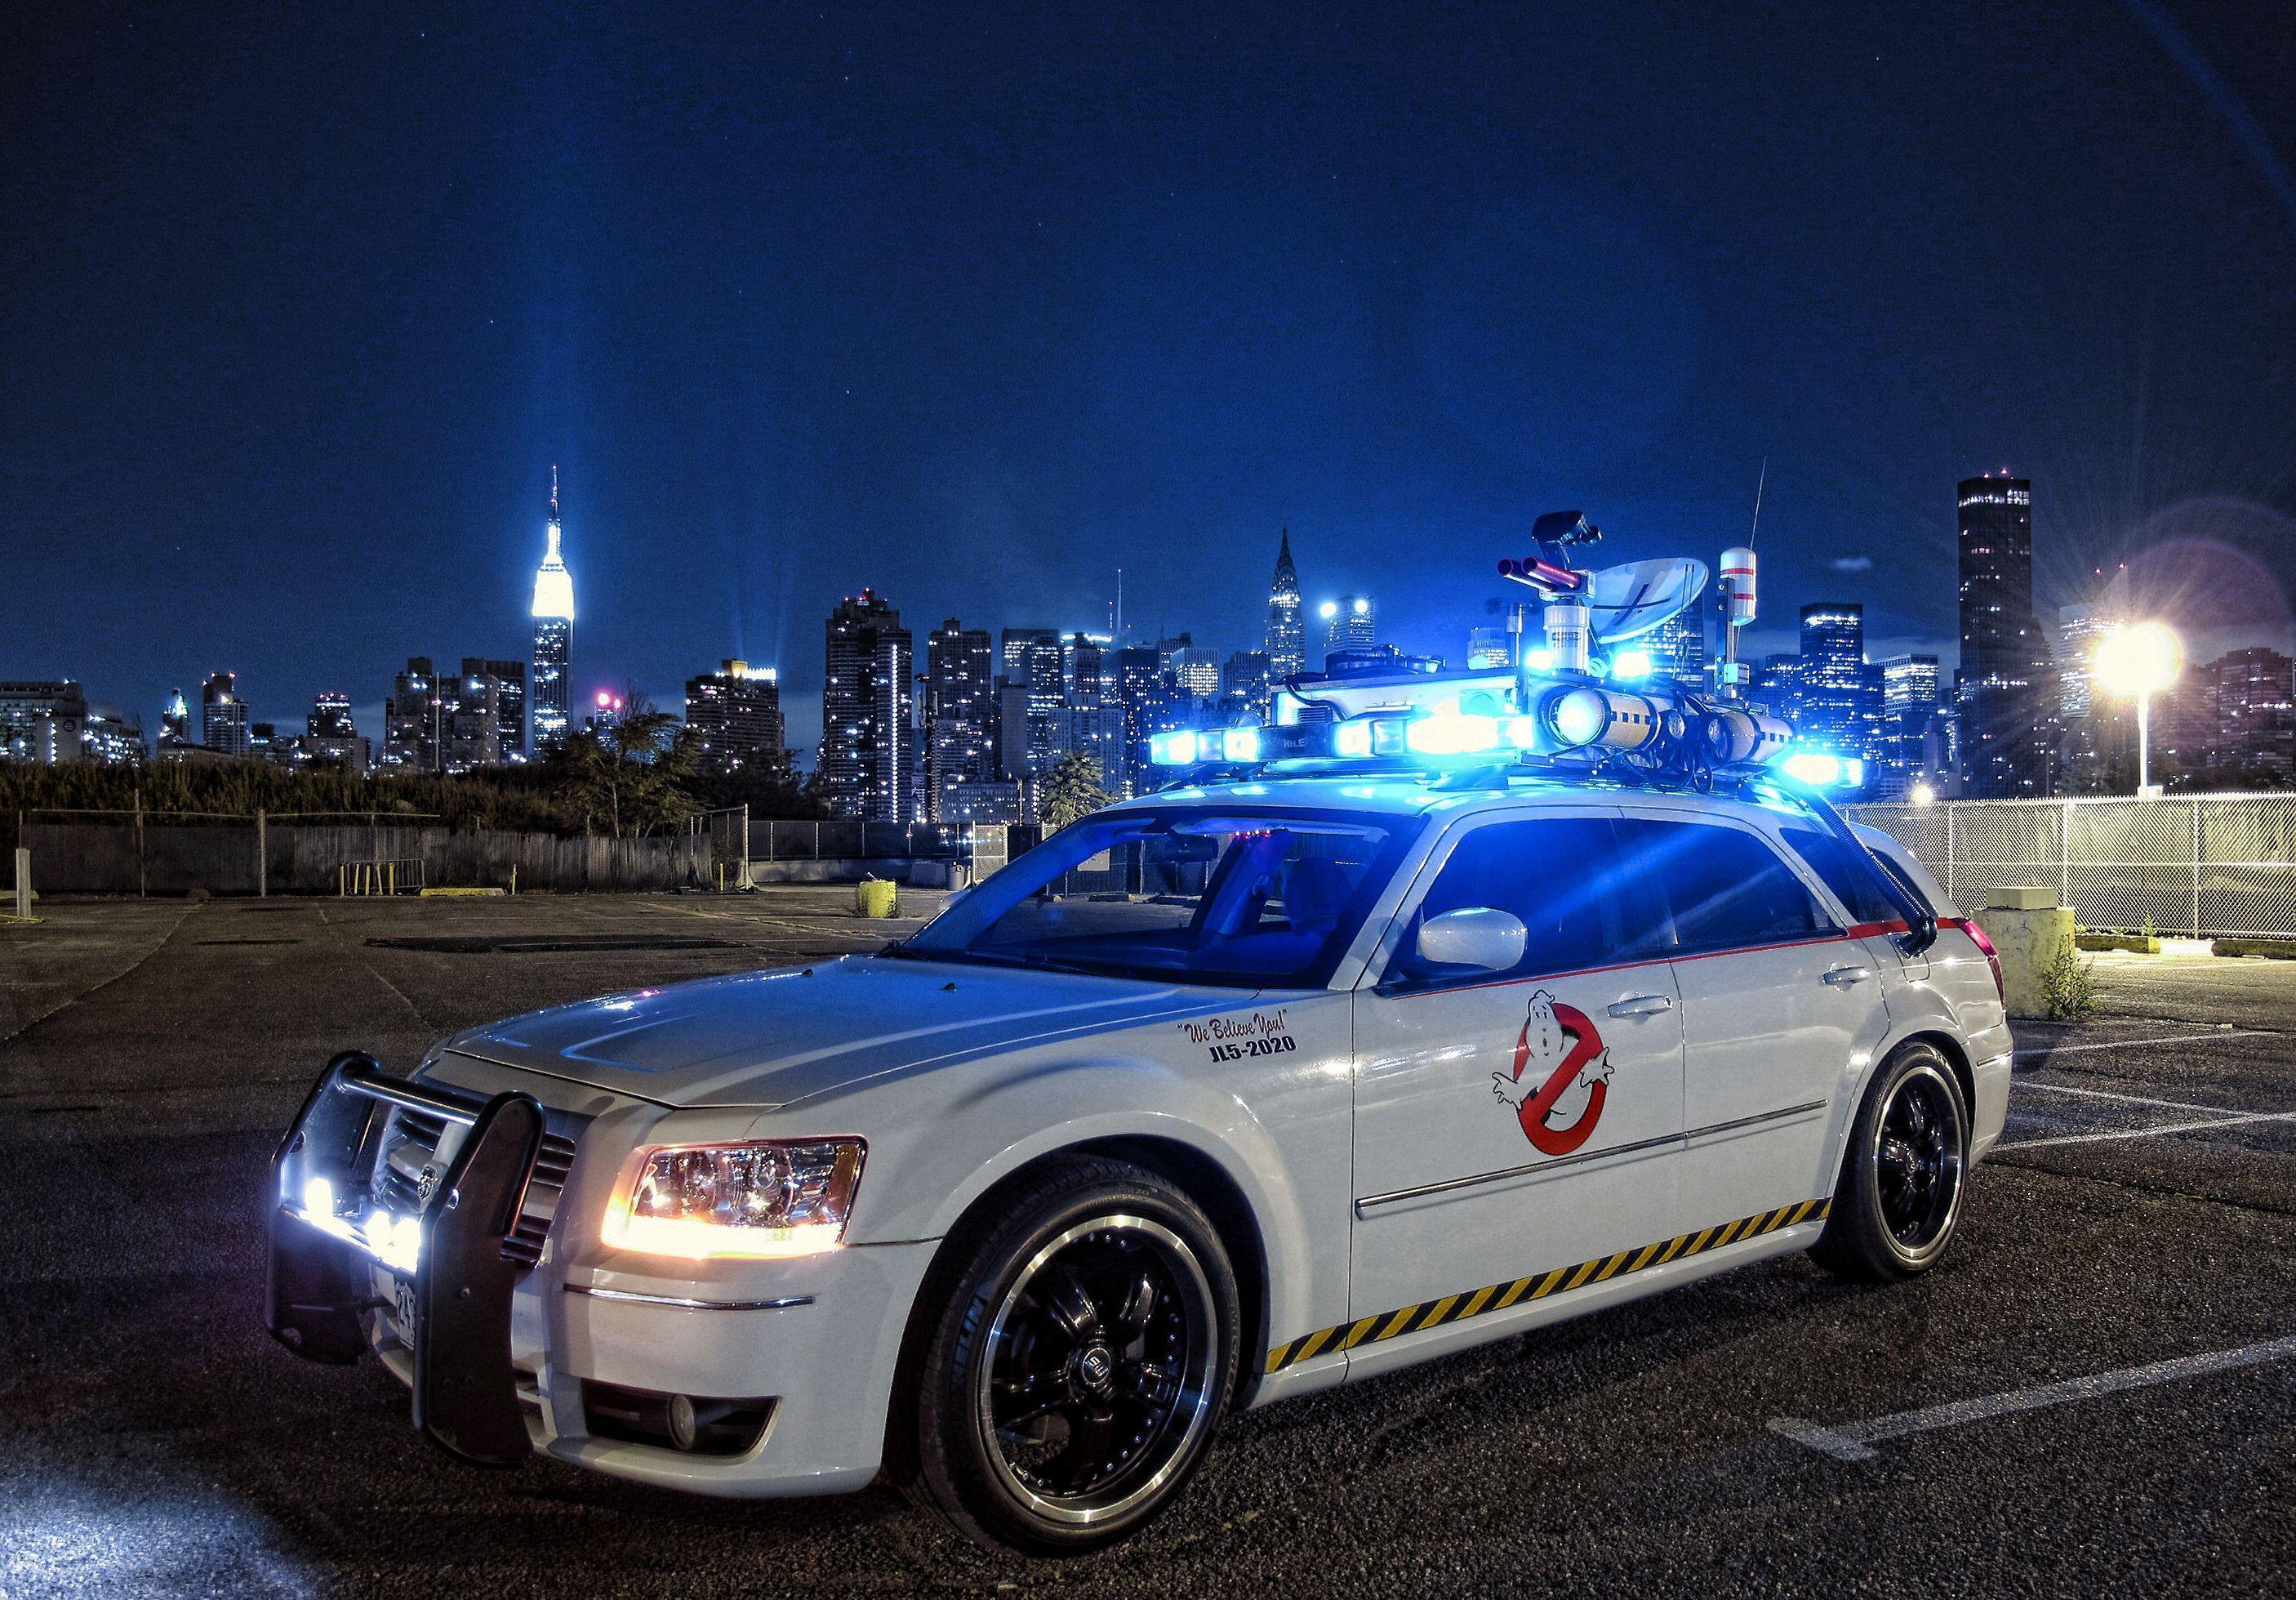 Ghostbusters Ecto 1 Dodge Magnum